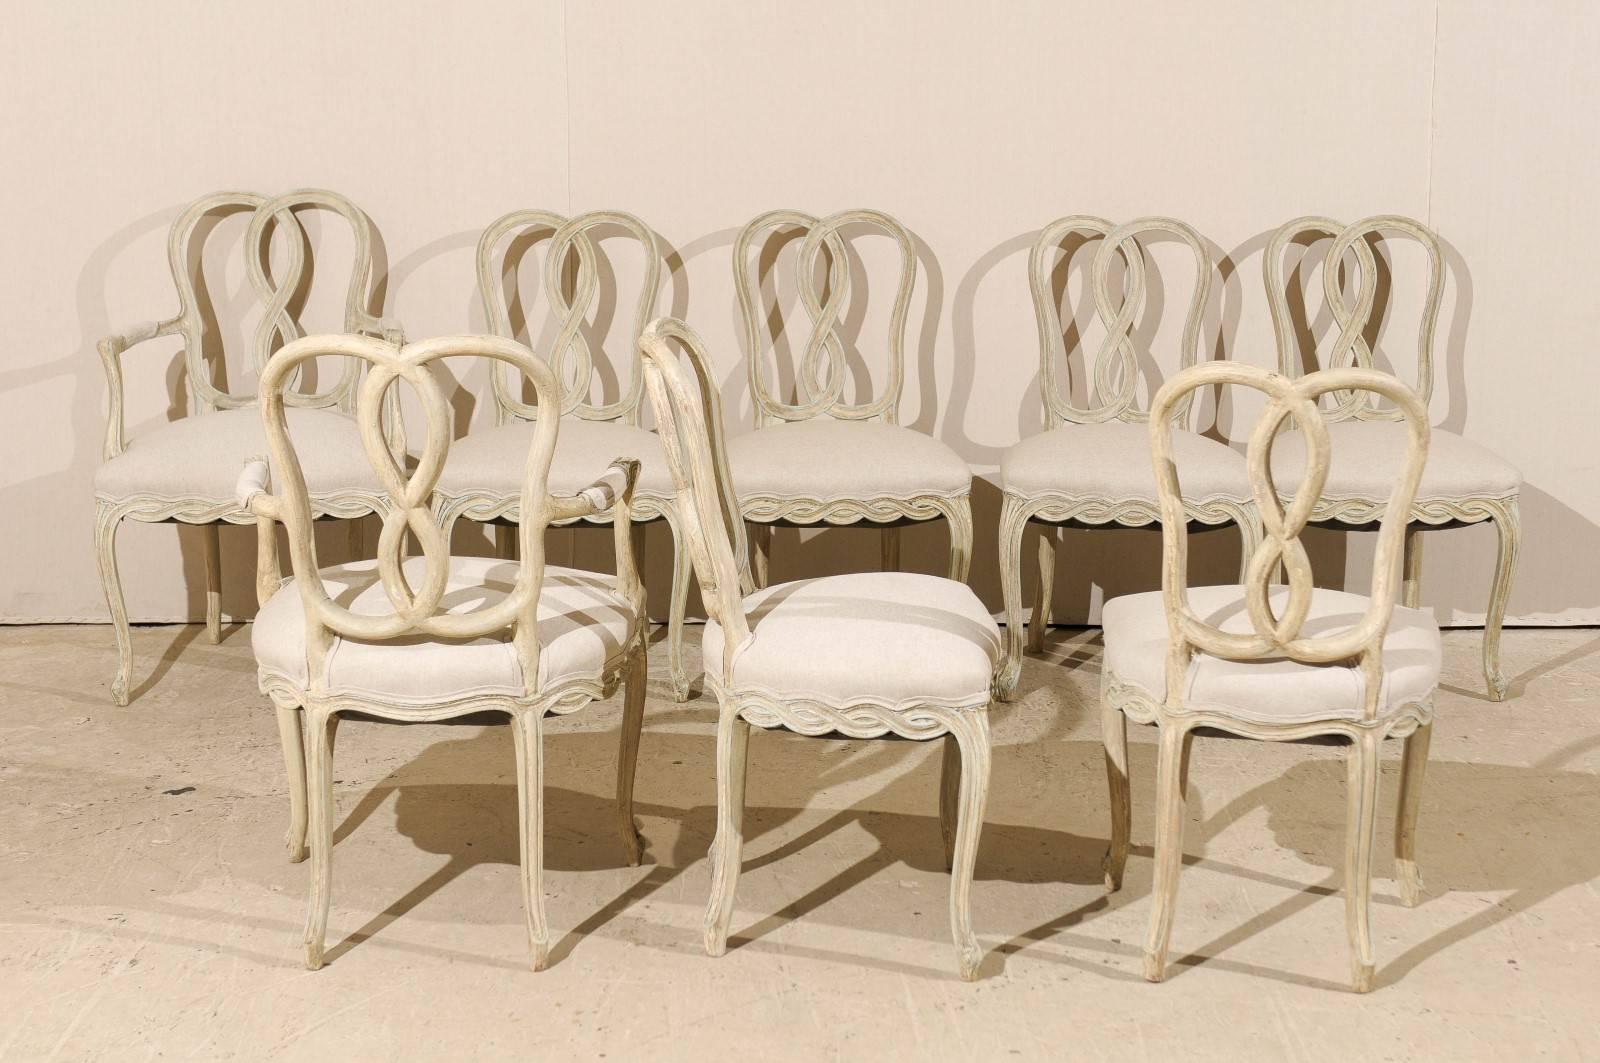 20th Century Set of Eight Italian Venetian Style Painted Wood Chairs with Ribbon Motifs